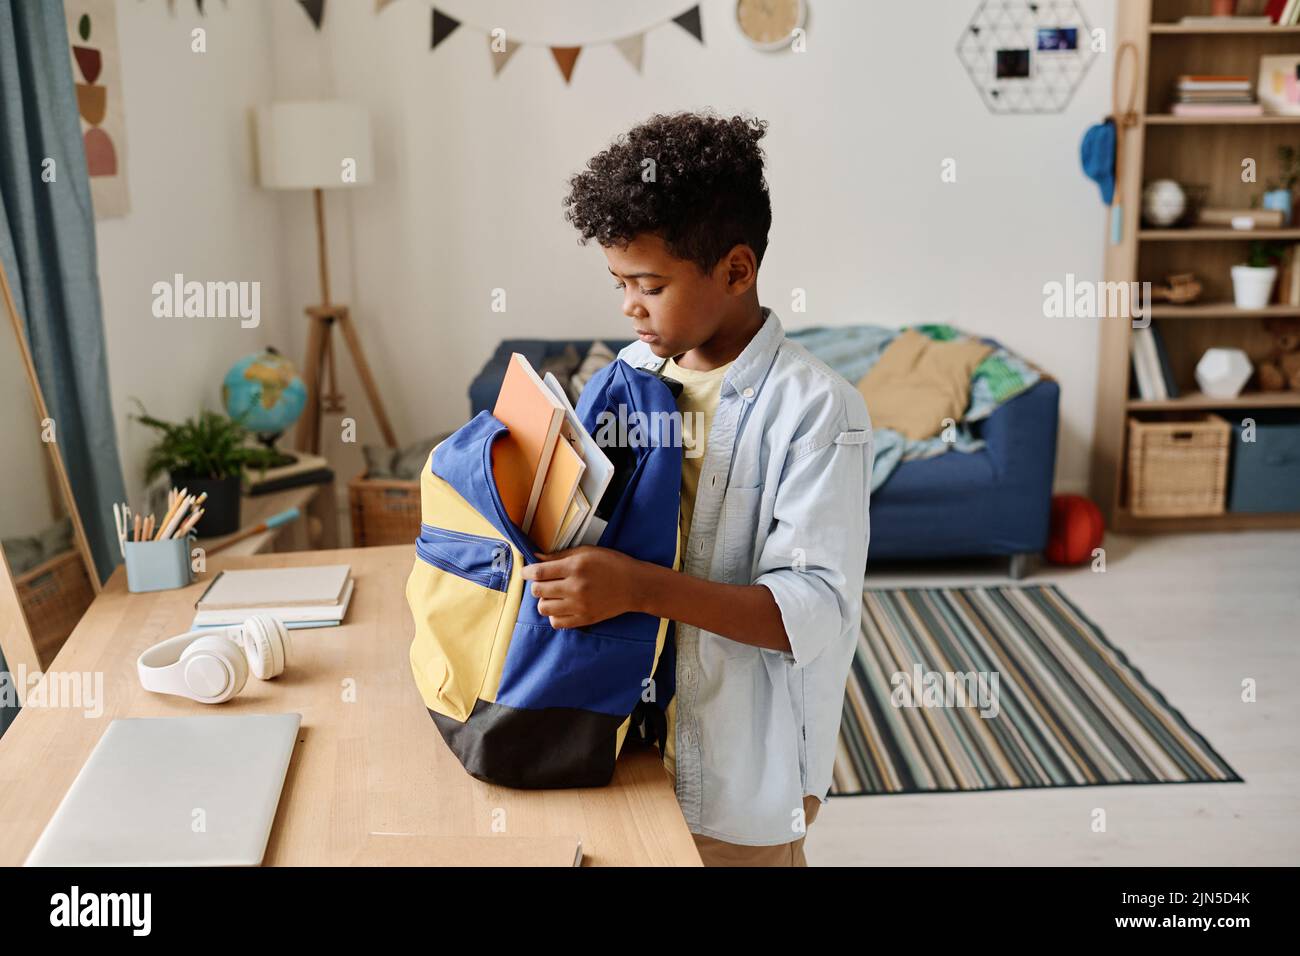 Child preparing his school bag for school packing books and copybooks in it Stock Photo